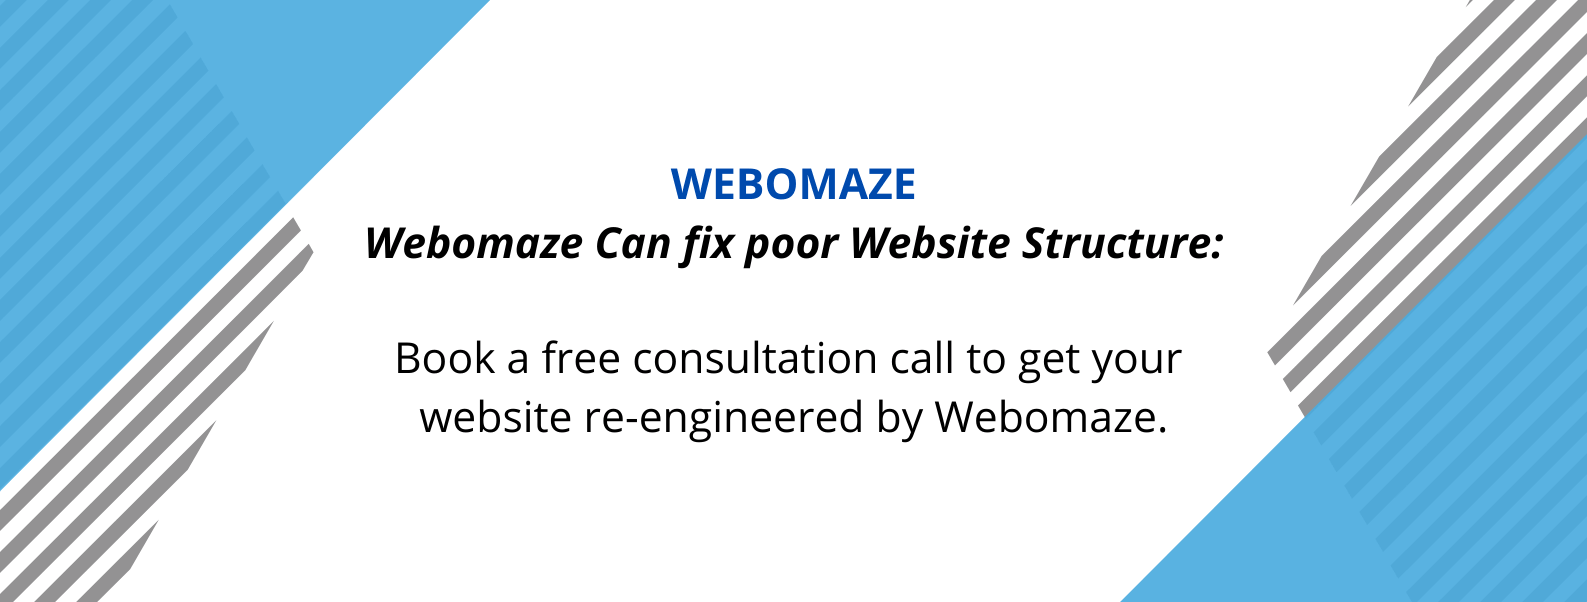 Unique selling proposition of one of the best SEO agencies of Australia - WeboMaze